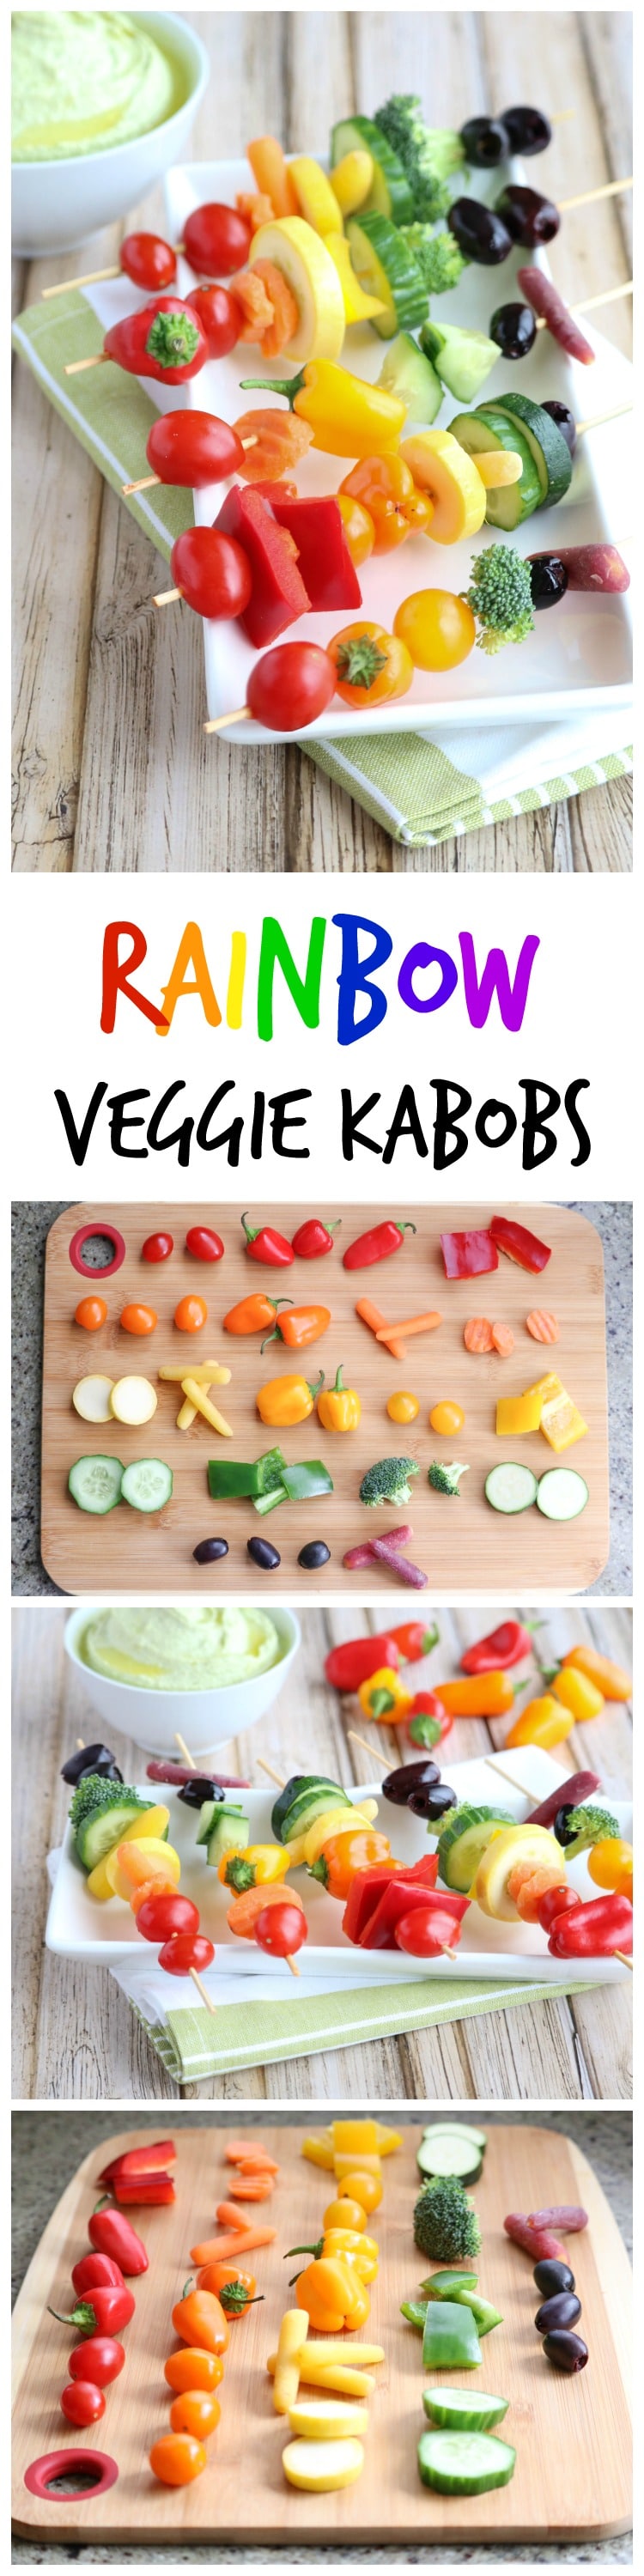 These Rainbow Veggie Kabobs are so much more fun than veggies and dip on that plain-old veggie tray! Perfect for picnics and parties! And a great way to inspire kids to eat more veggies - they’ll love creating their own! | www.TwoHealthyKitchens.com